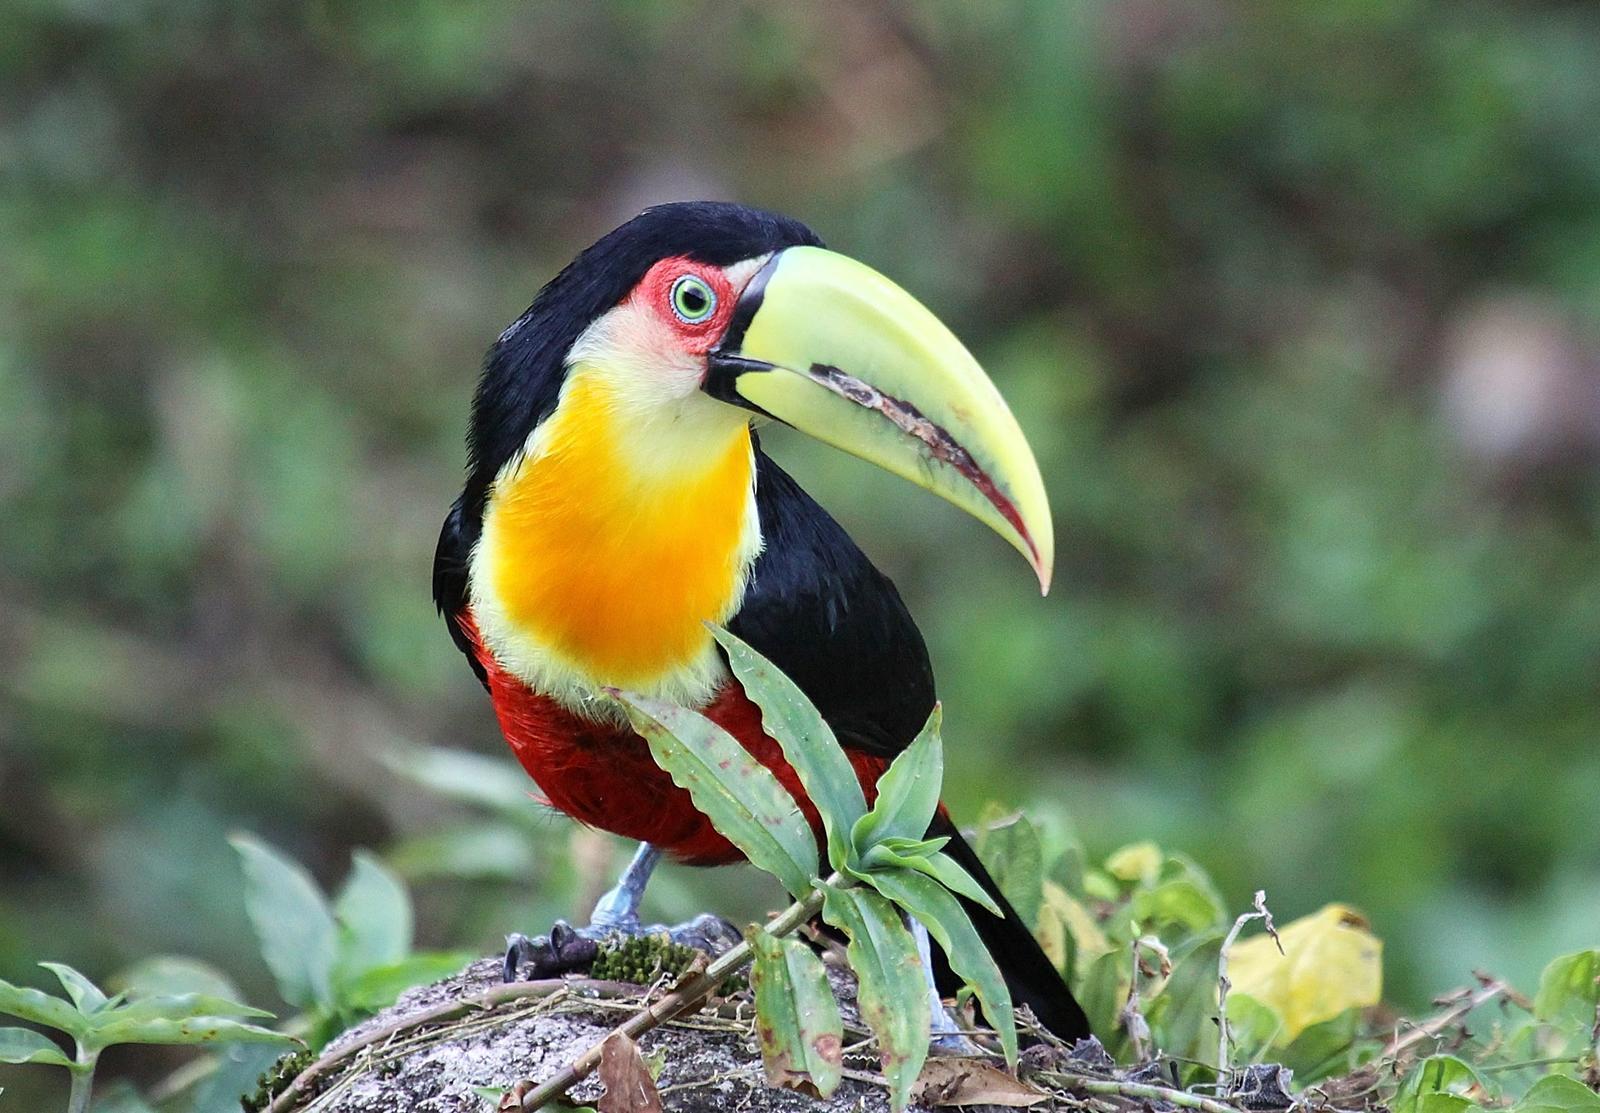 Red-breasted Toucan Photo by Matthew McCluskey